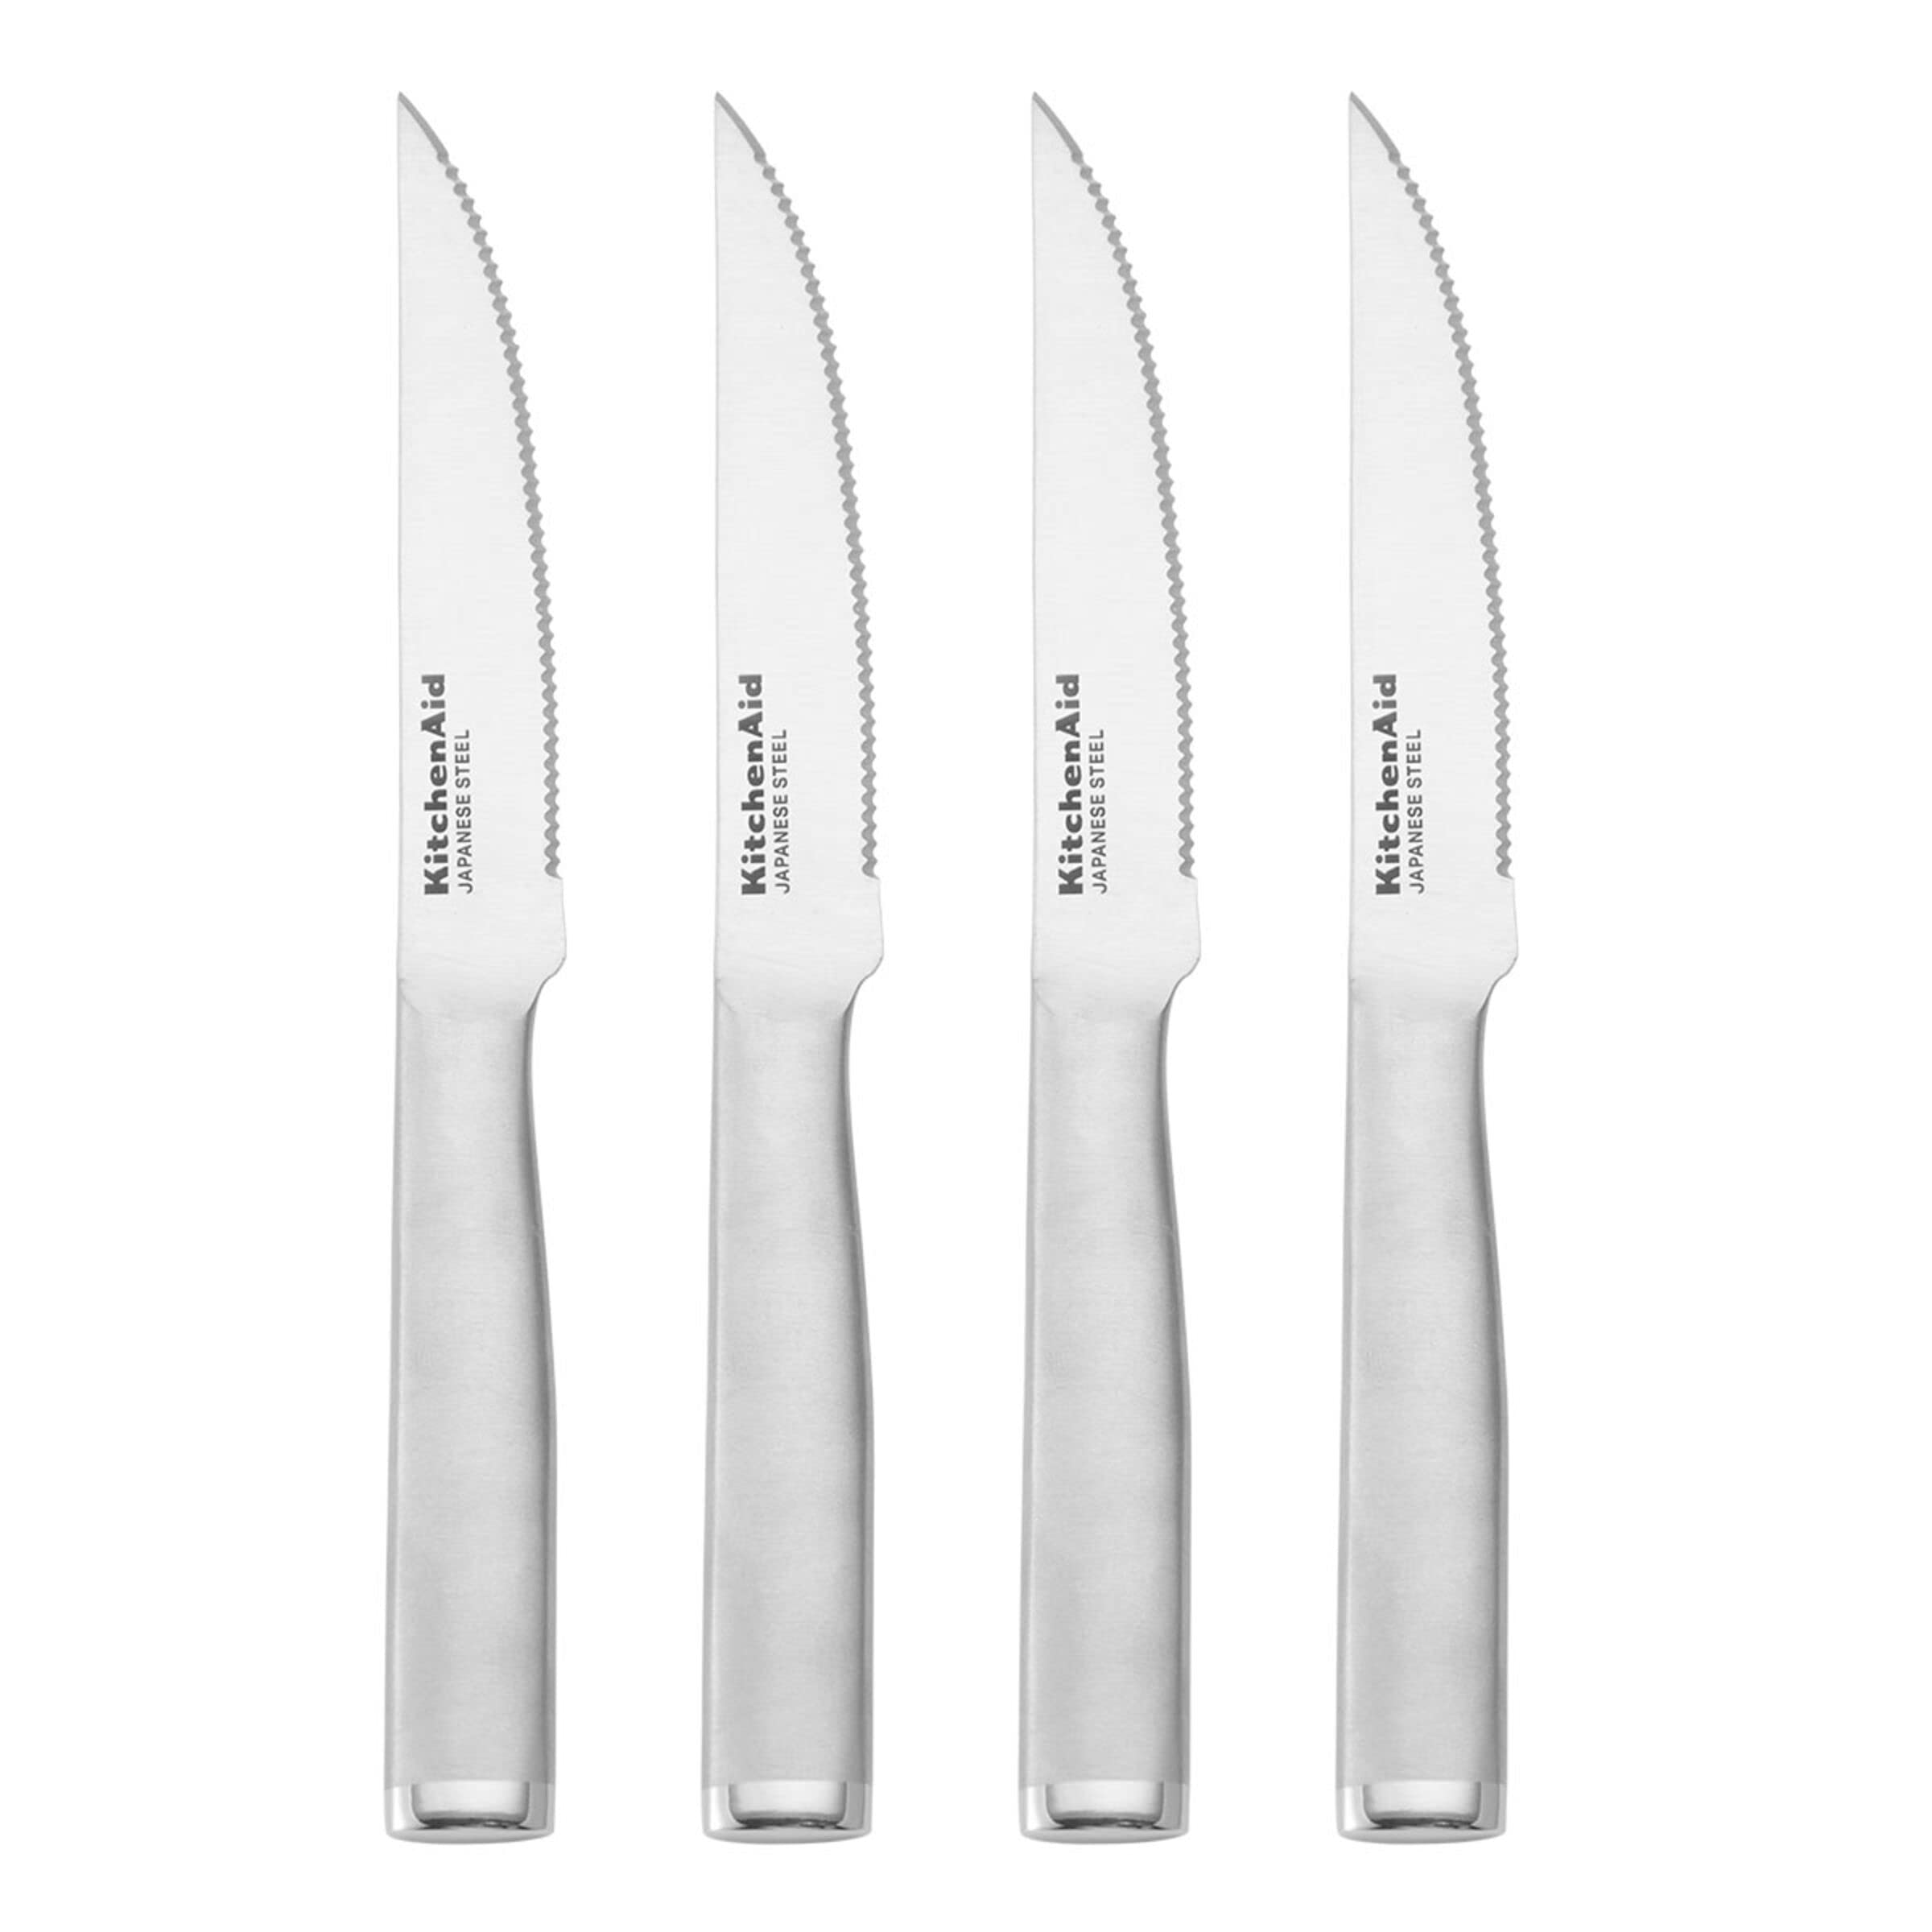 4-Count KitchenAid Gourmet Japanese Stainless Steel Steak Knife Set $19.60 + Free Shipping w/ Prime or on $25+